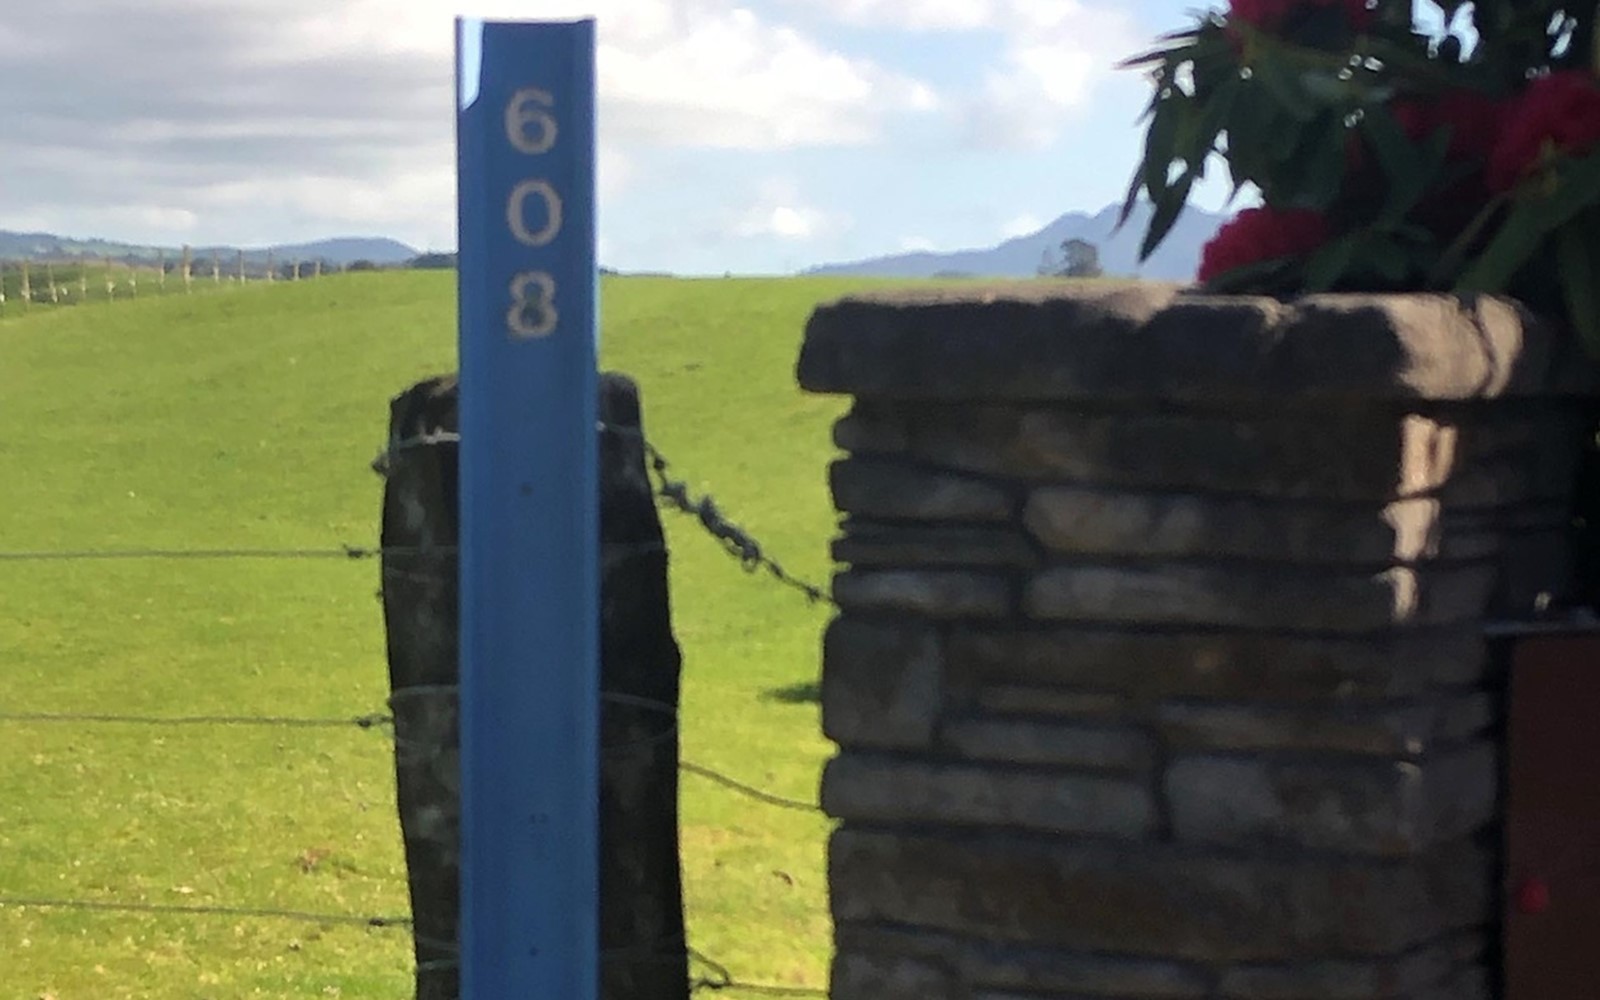 A Rural Property Number post.